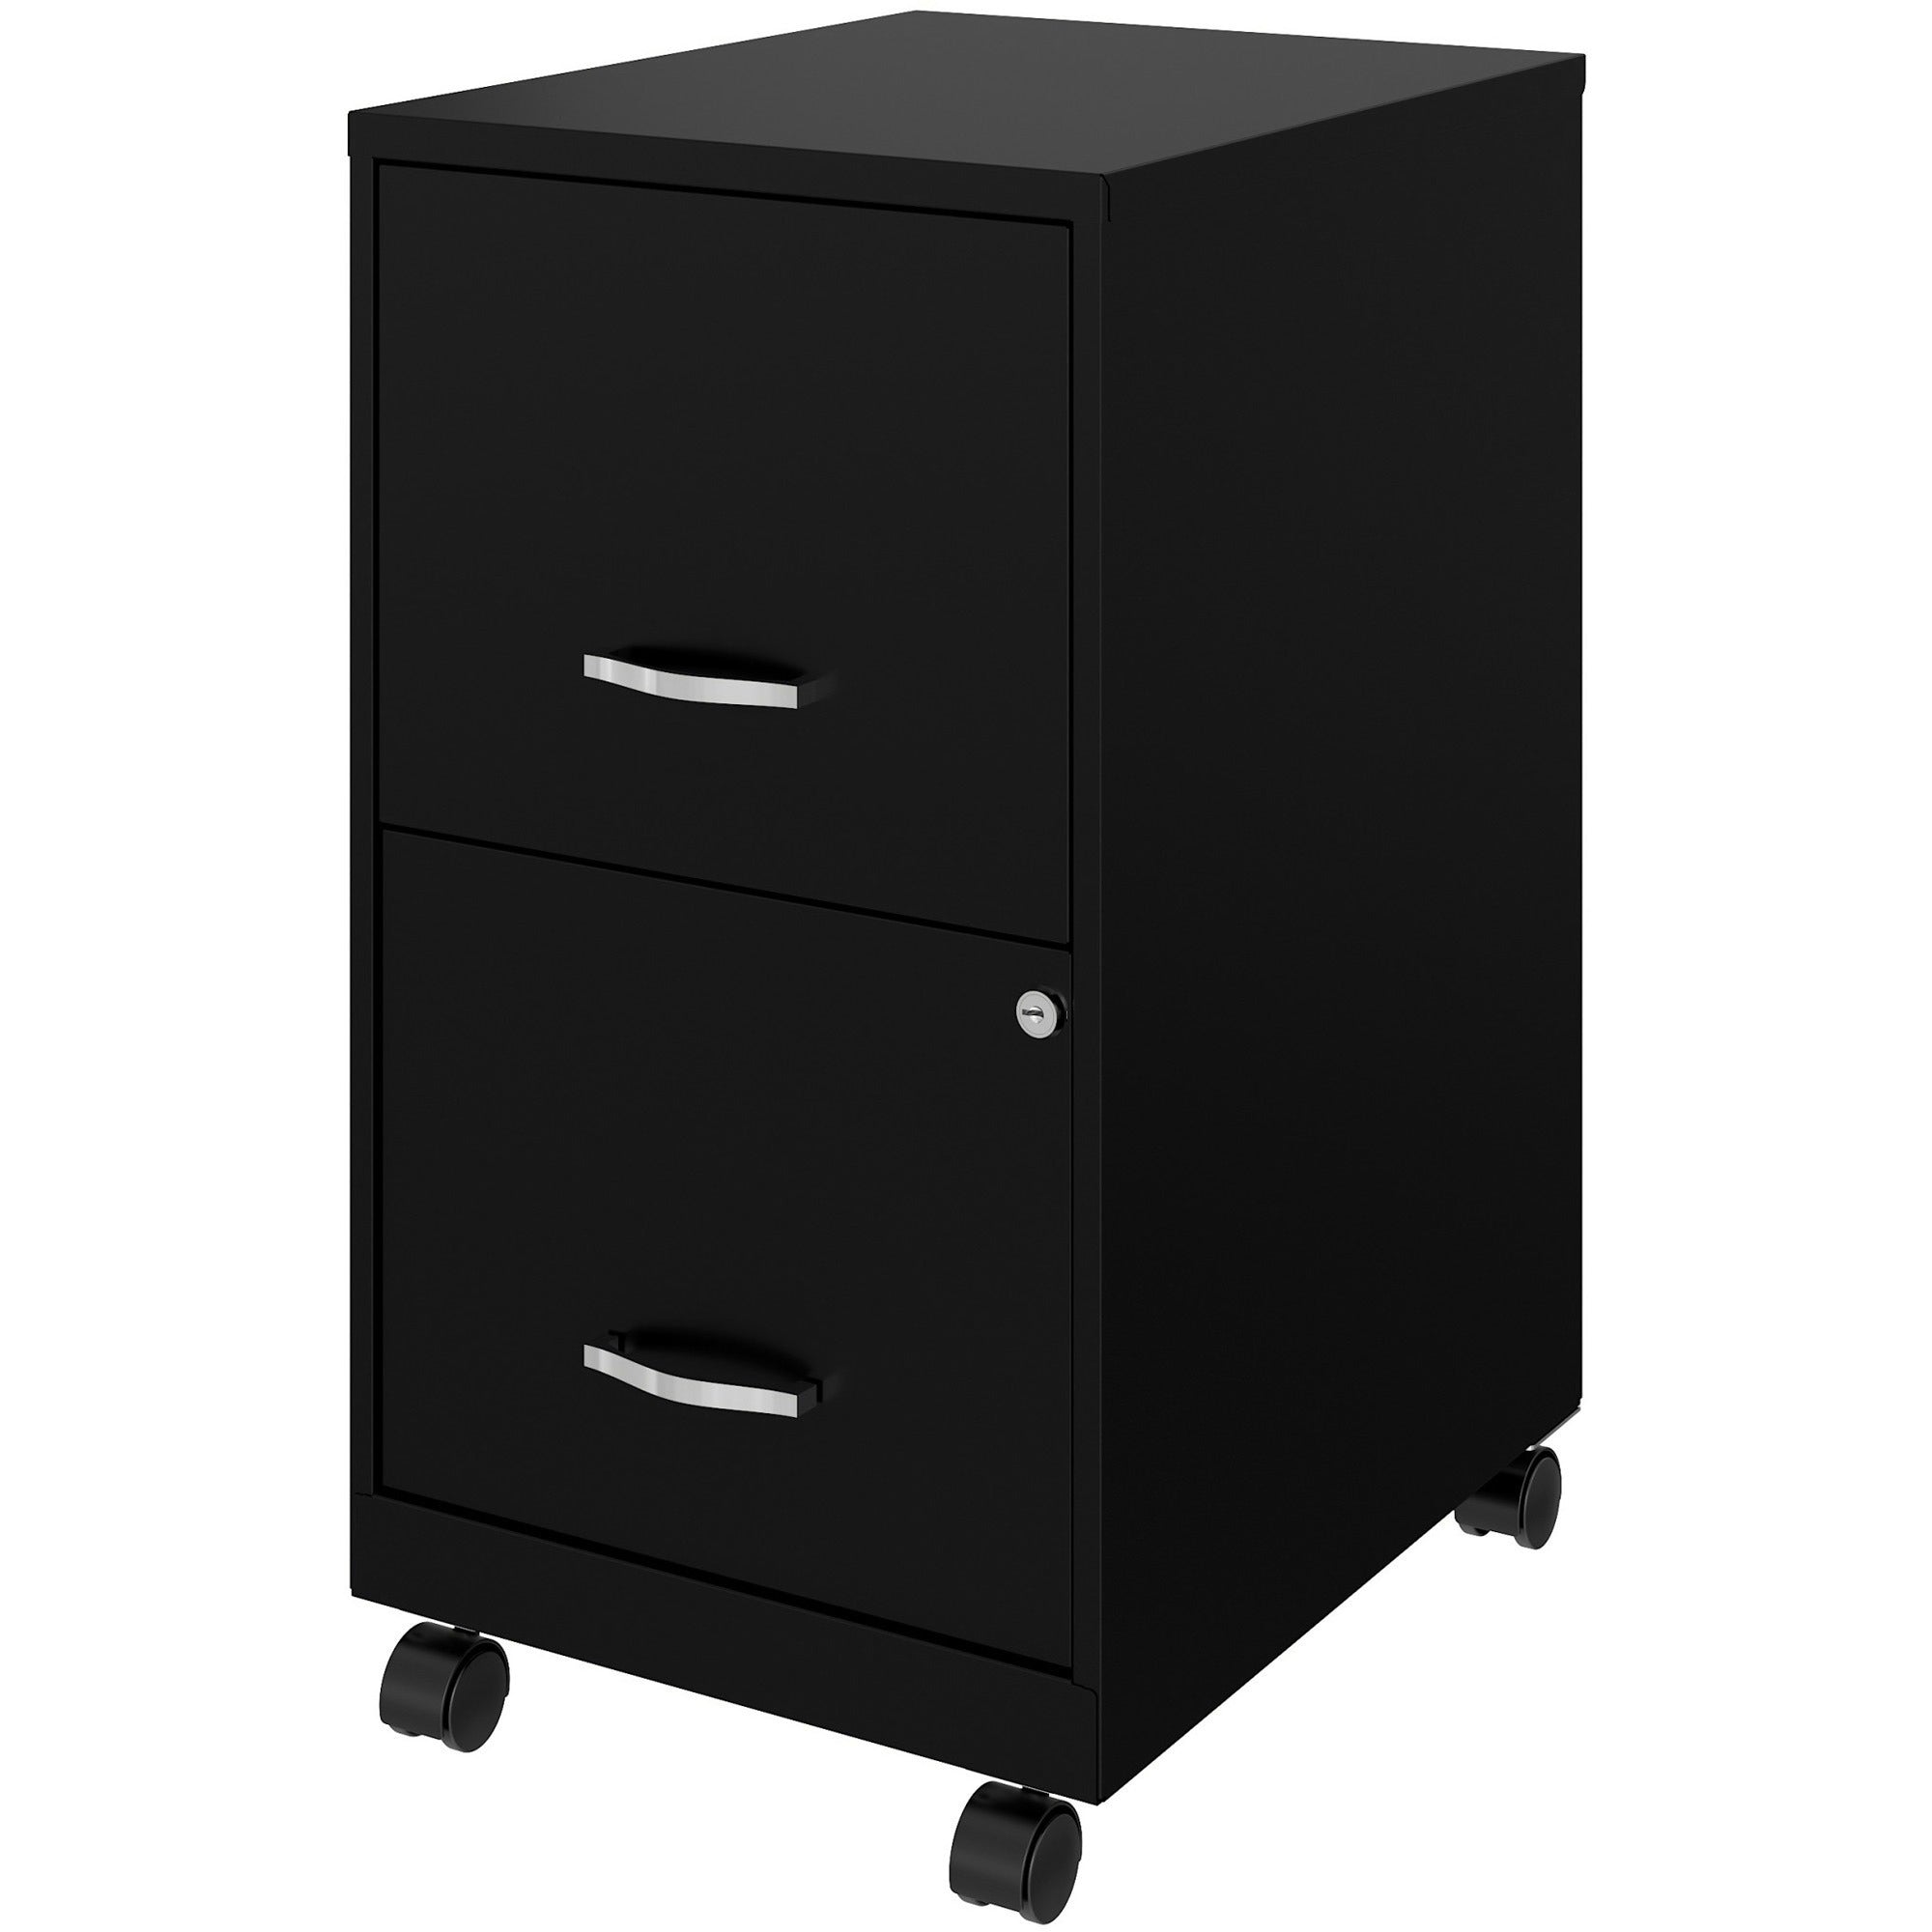 nusparc-mobile-file-cabinet-142-x-18-x-265-for-file-letter-mobility-locking-drawer-glide-suspension-3-4-drawer-extension-cam-lock-nonporous-surface-black-painted-steel-steel-recycled_nprvf218ambk - 3